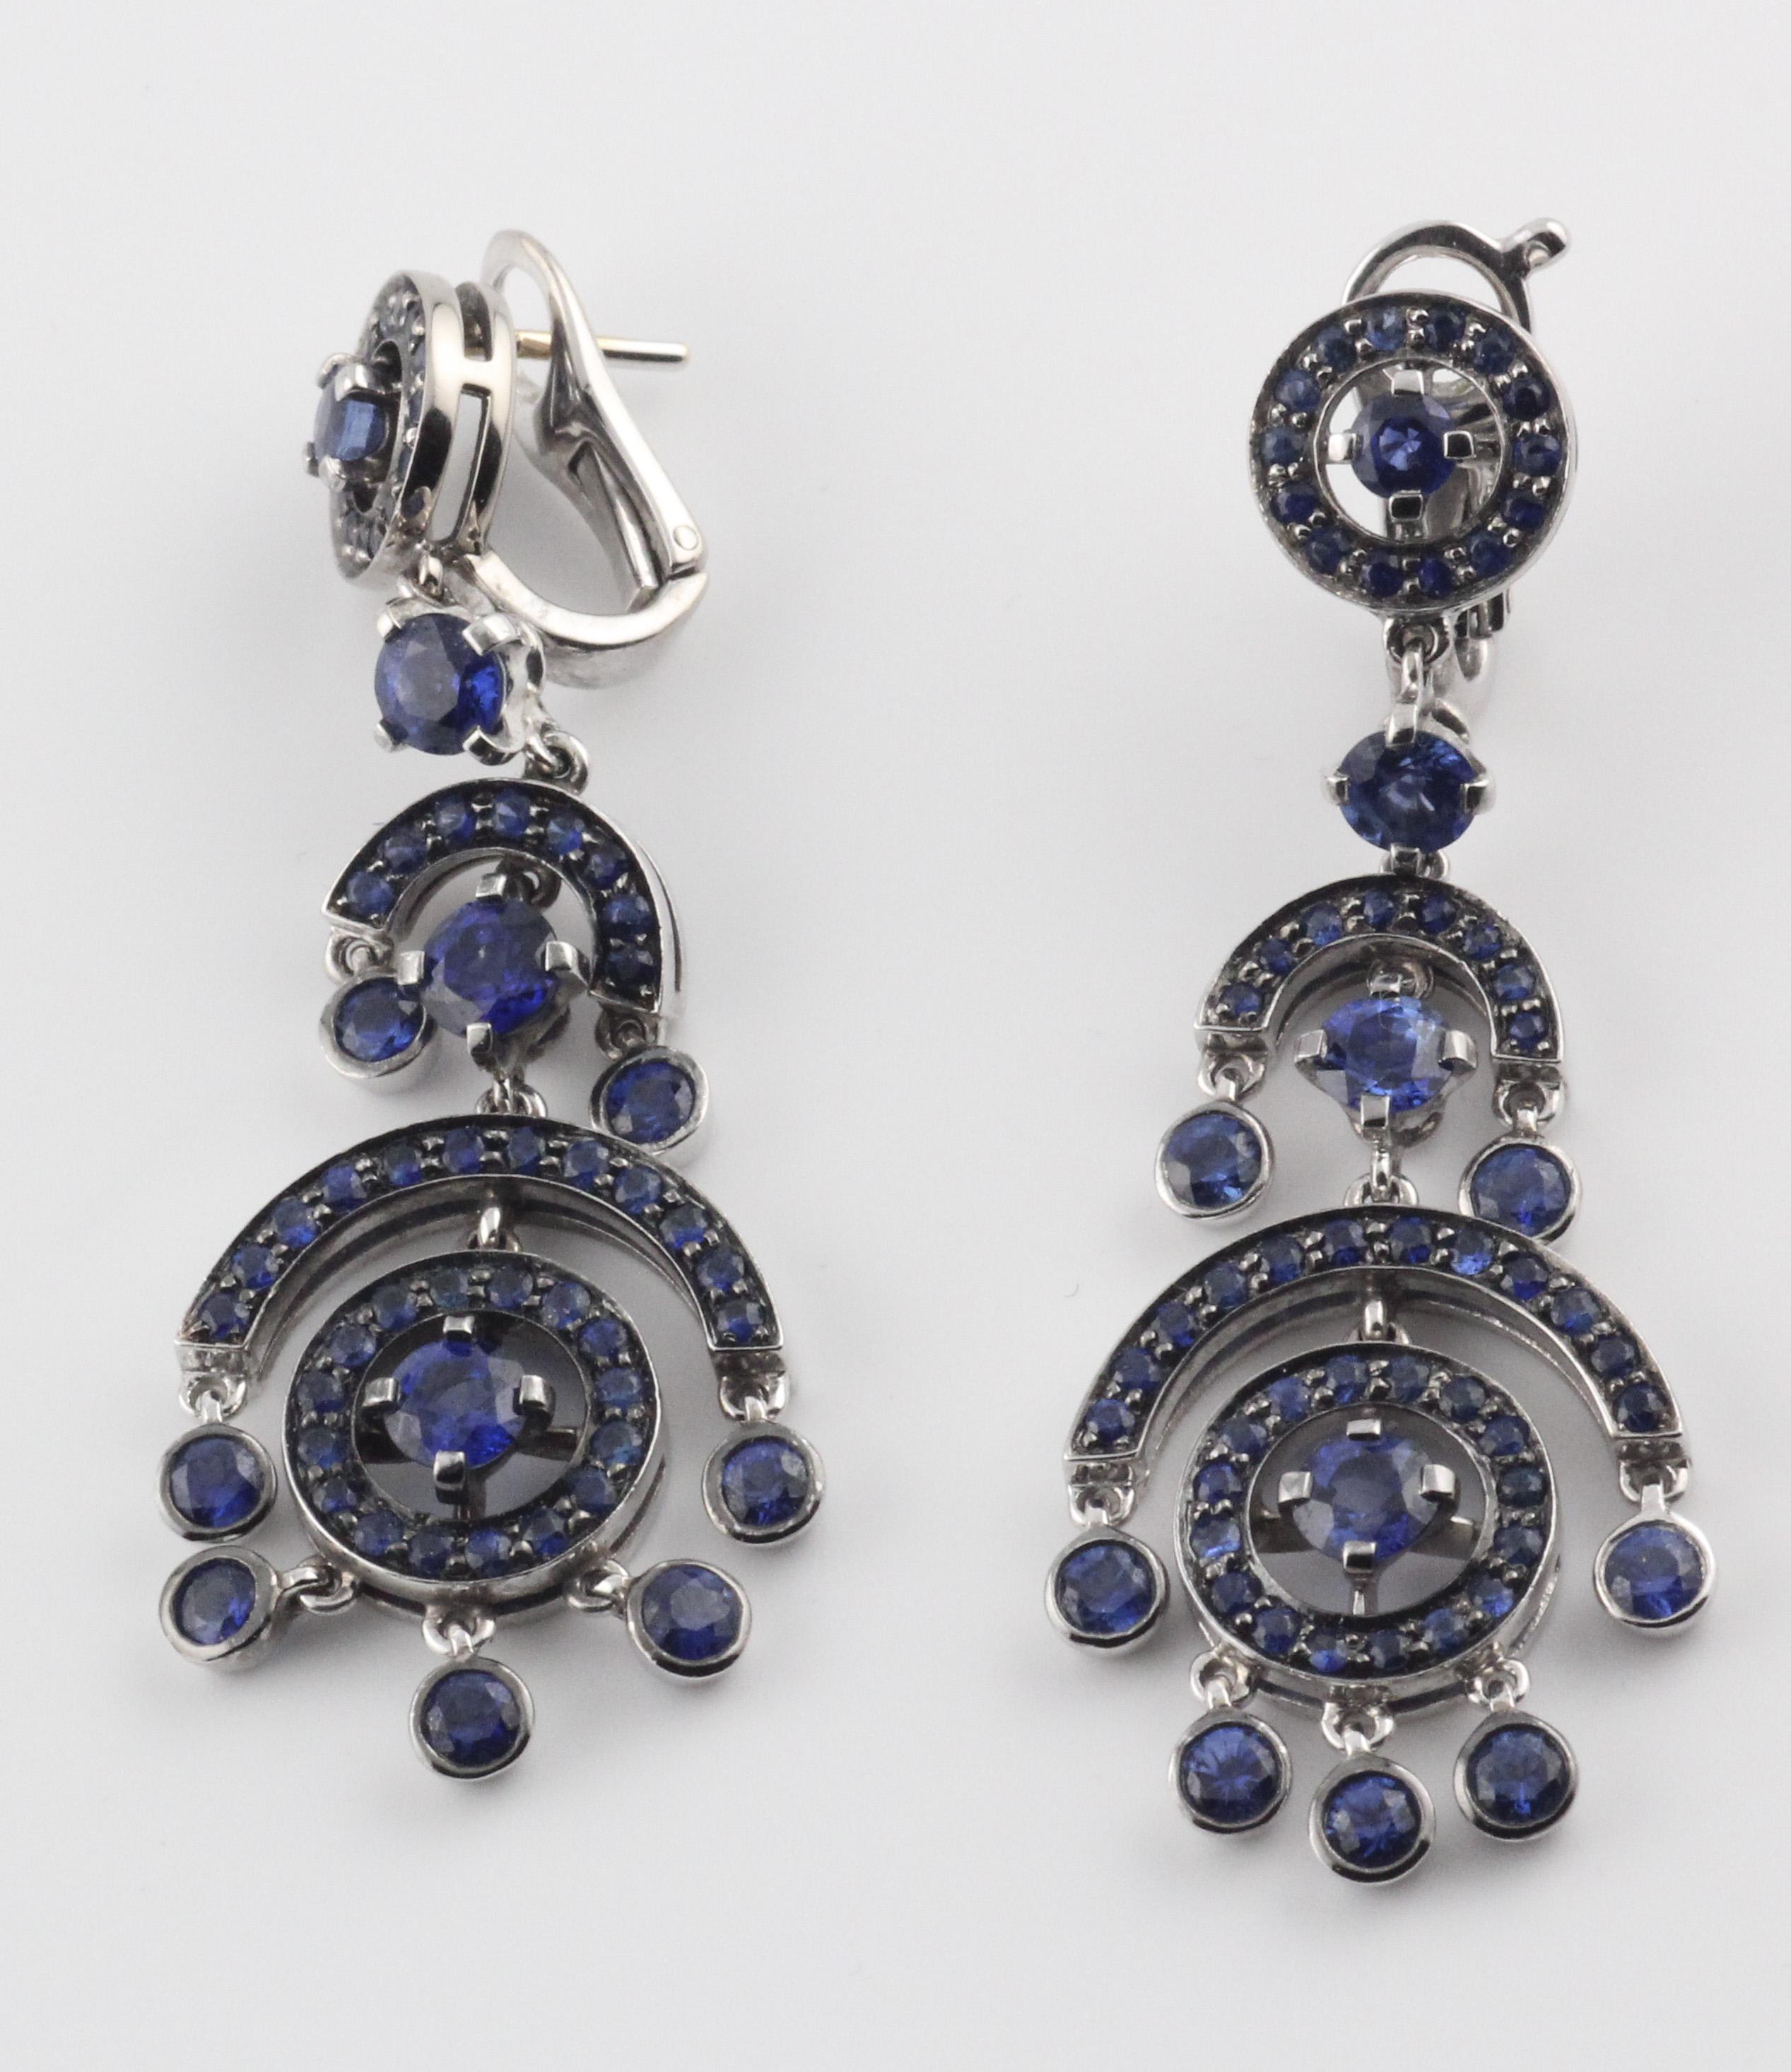 Boucheron Ava Sapphire 18k White Gold Chandelier Earrings In Good Condition For Sale In Bellmore, NY